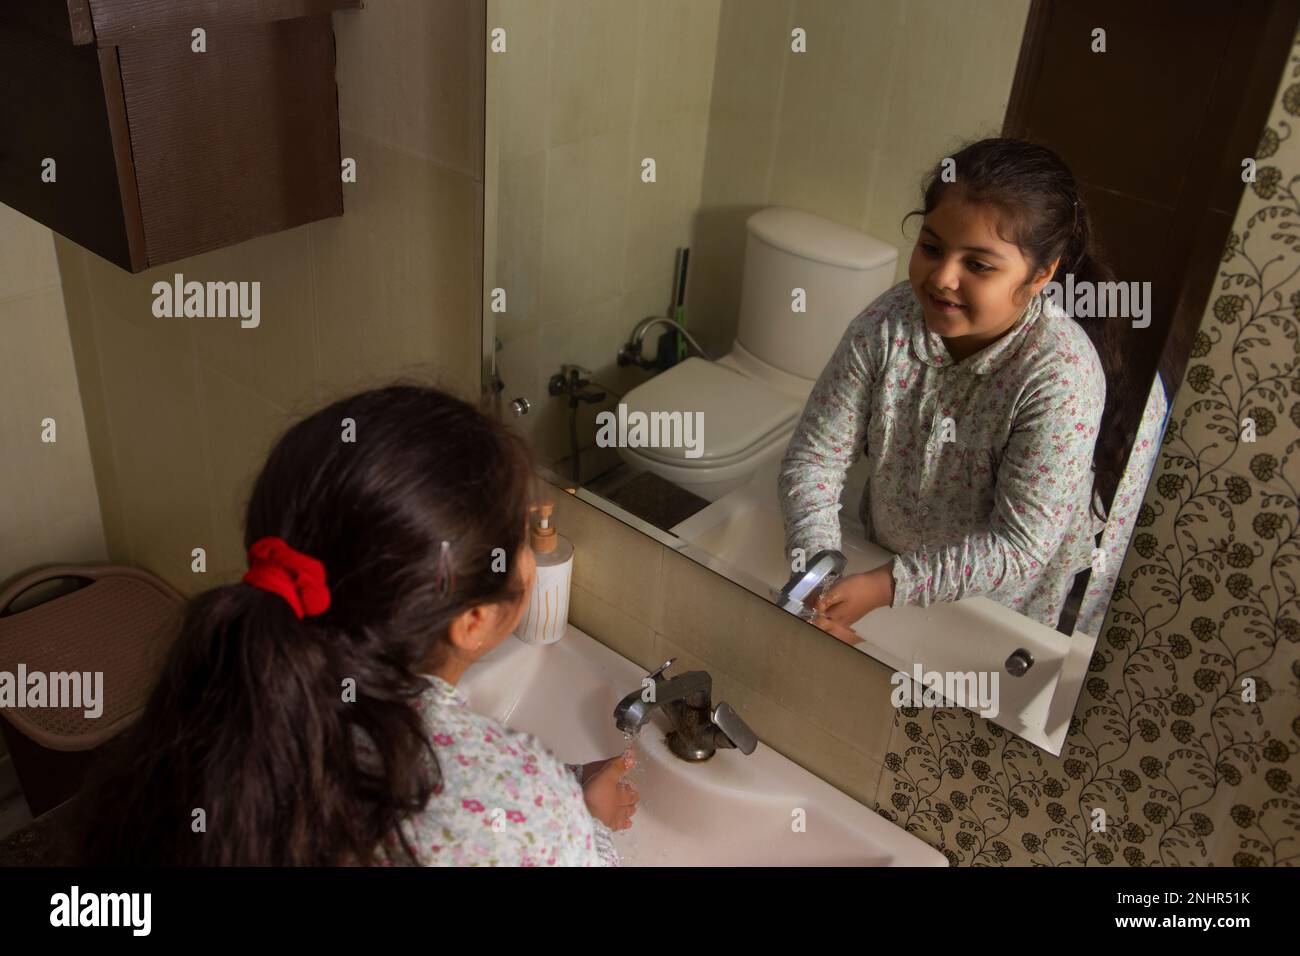 Top view of little girl washing hands in bathroom Stock Photo